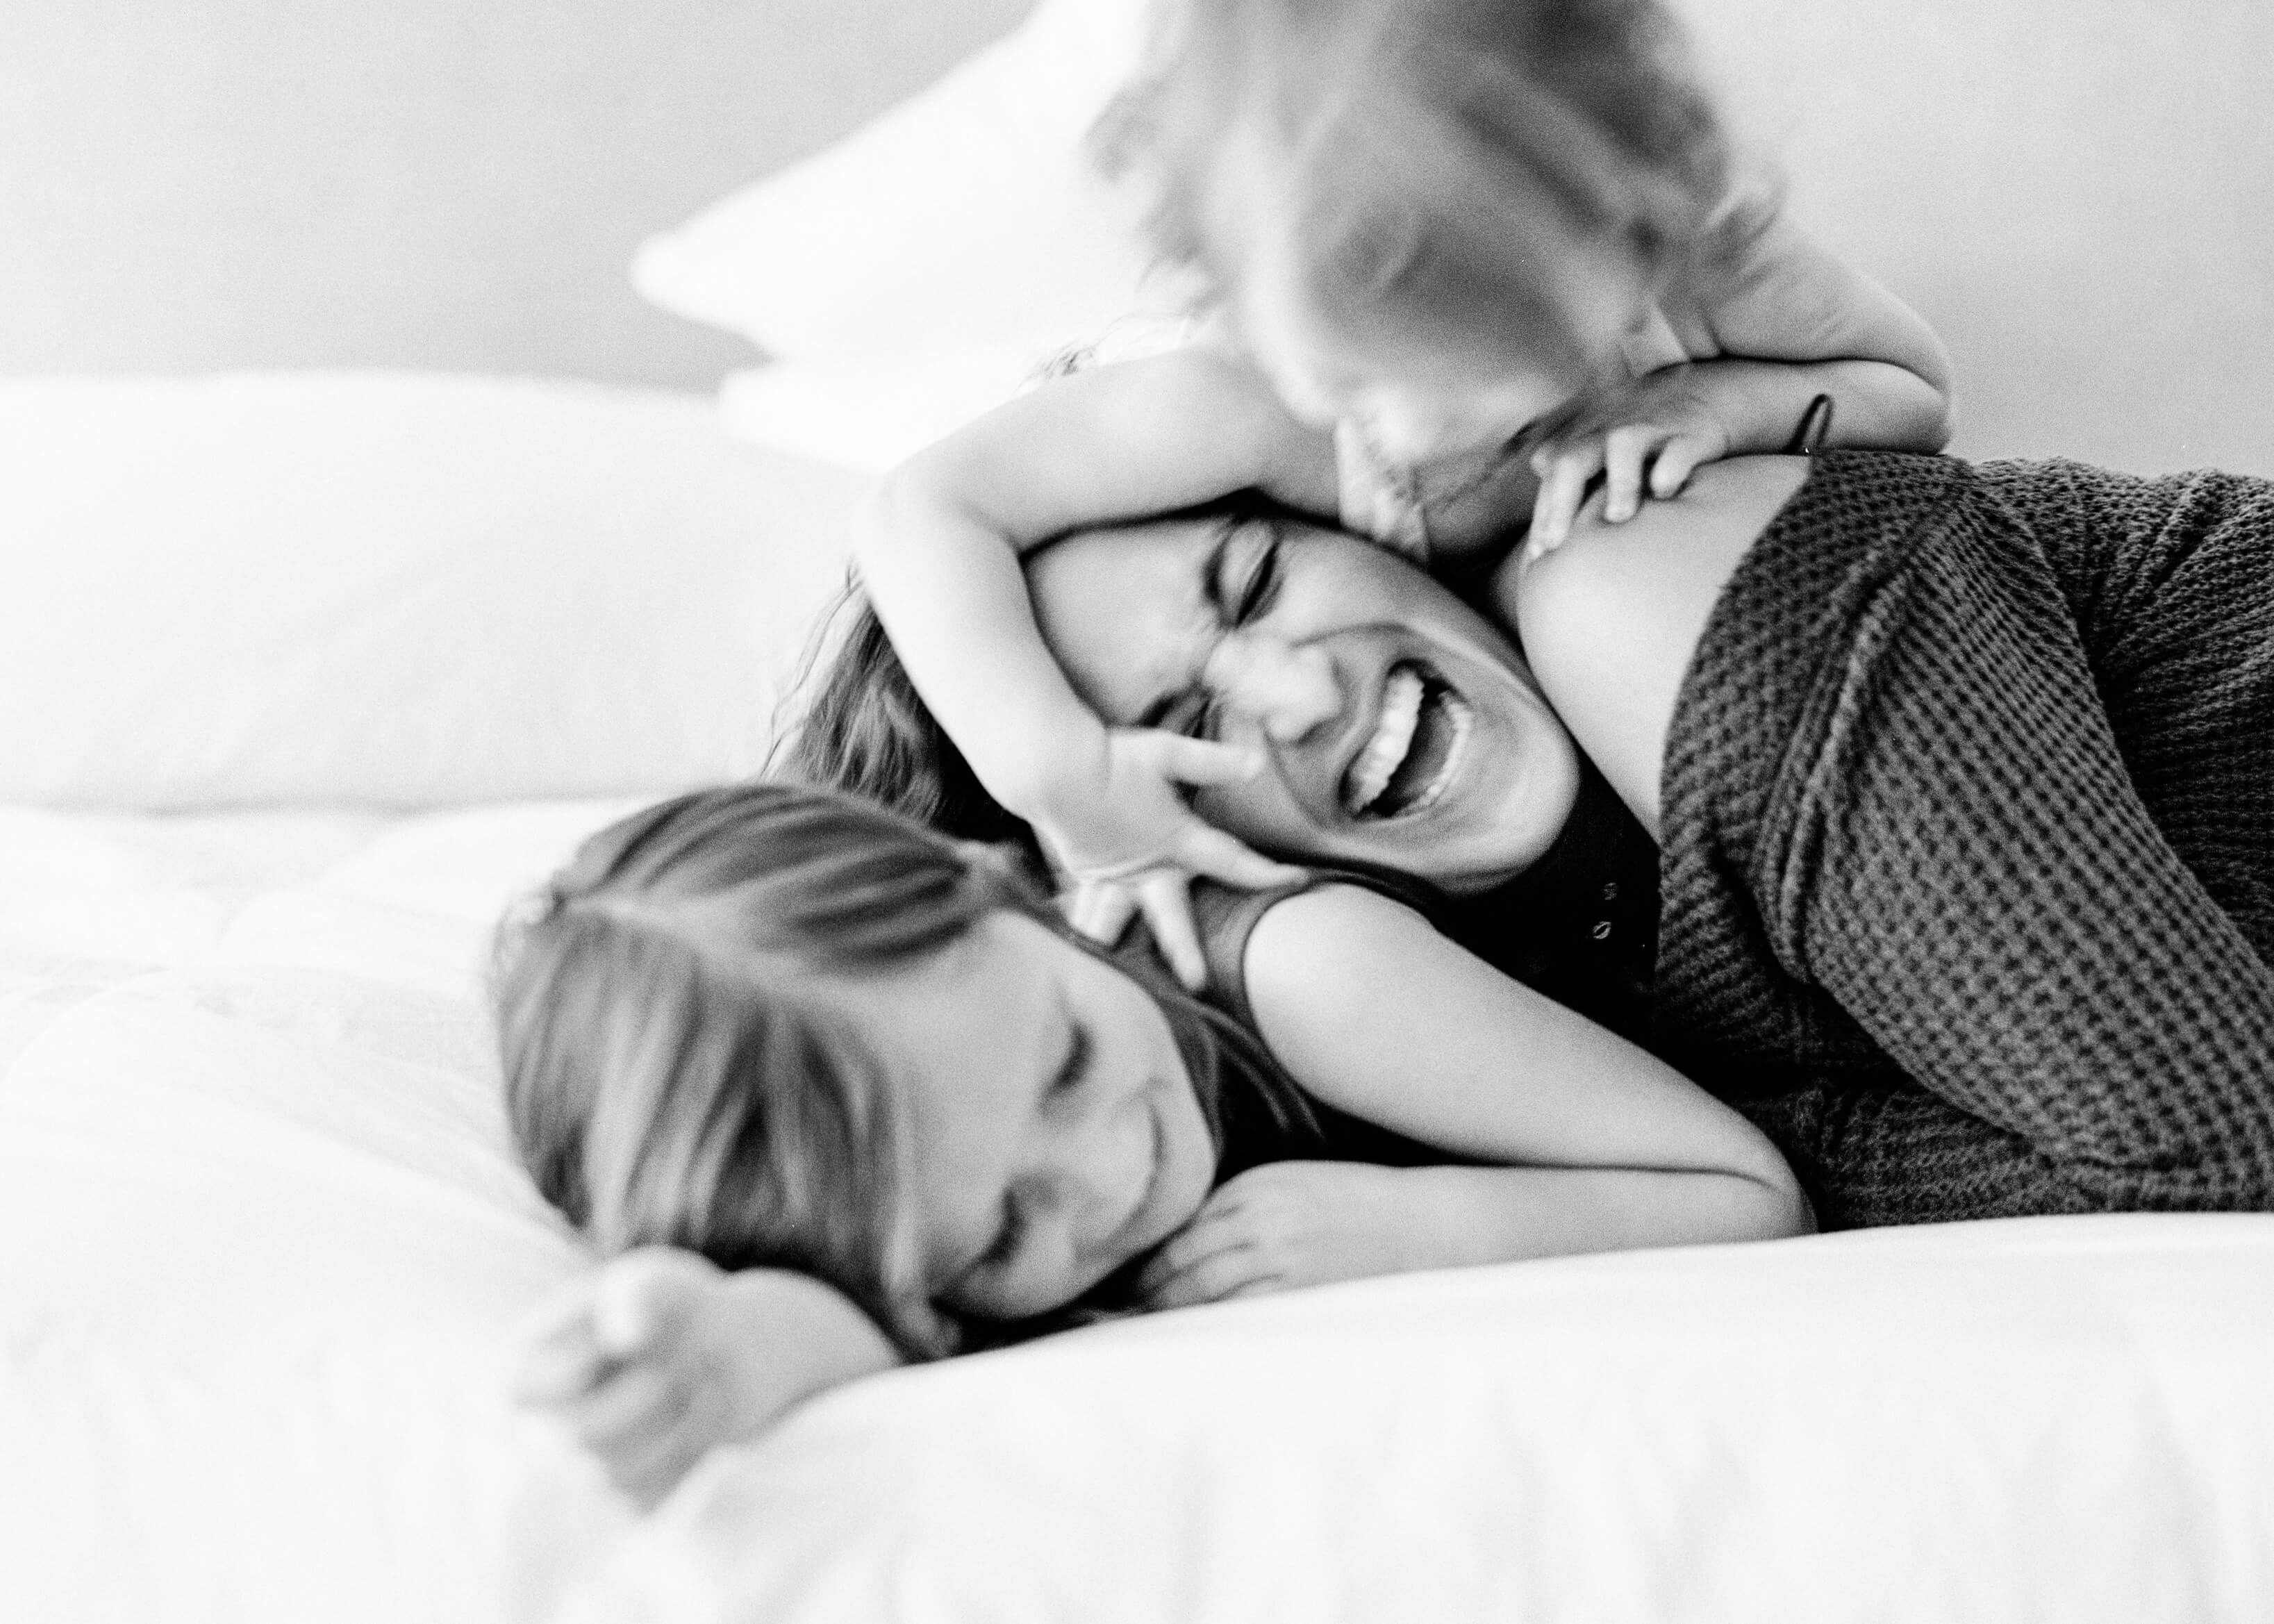 Little girl playfully jumping on top of mother and sister on bed